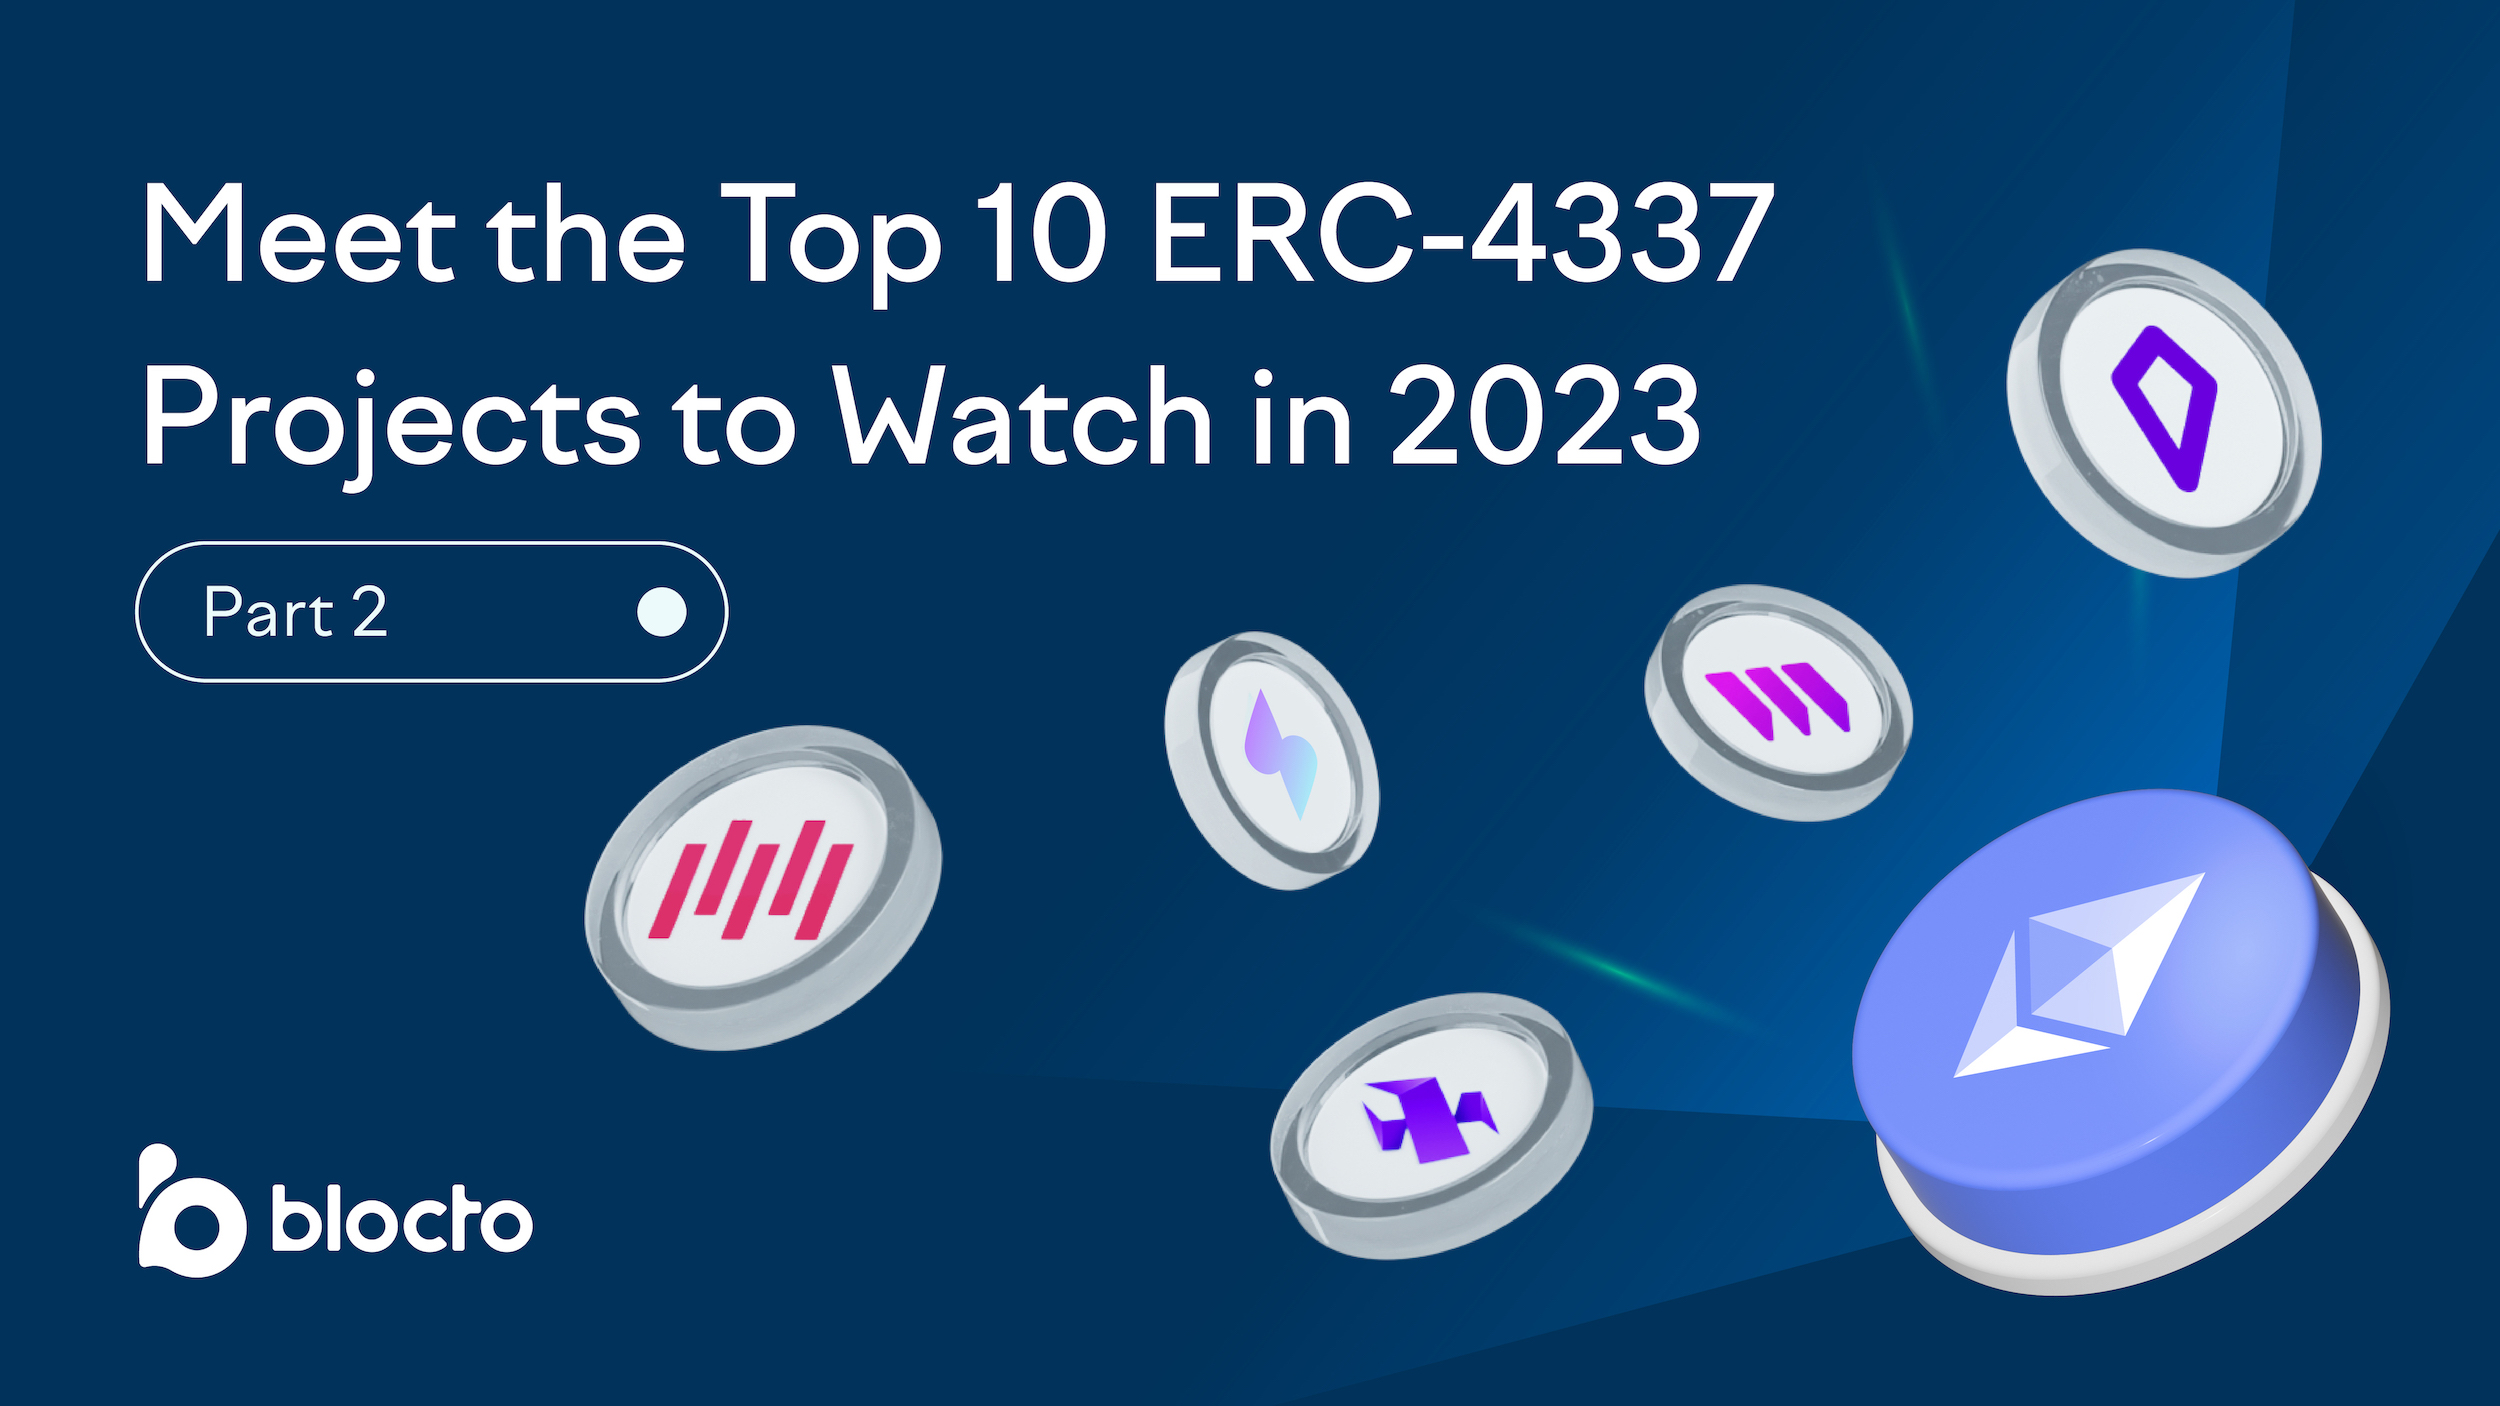 meet the top 10 erc-4337 projects to watch in 2023